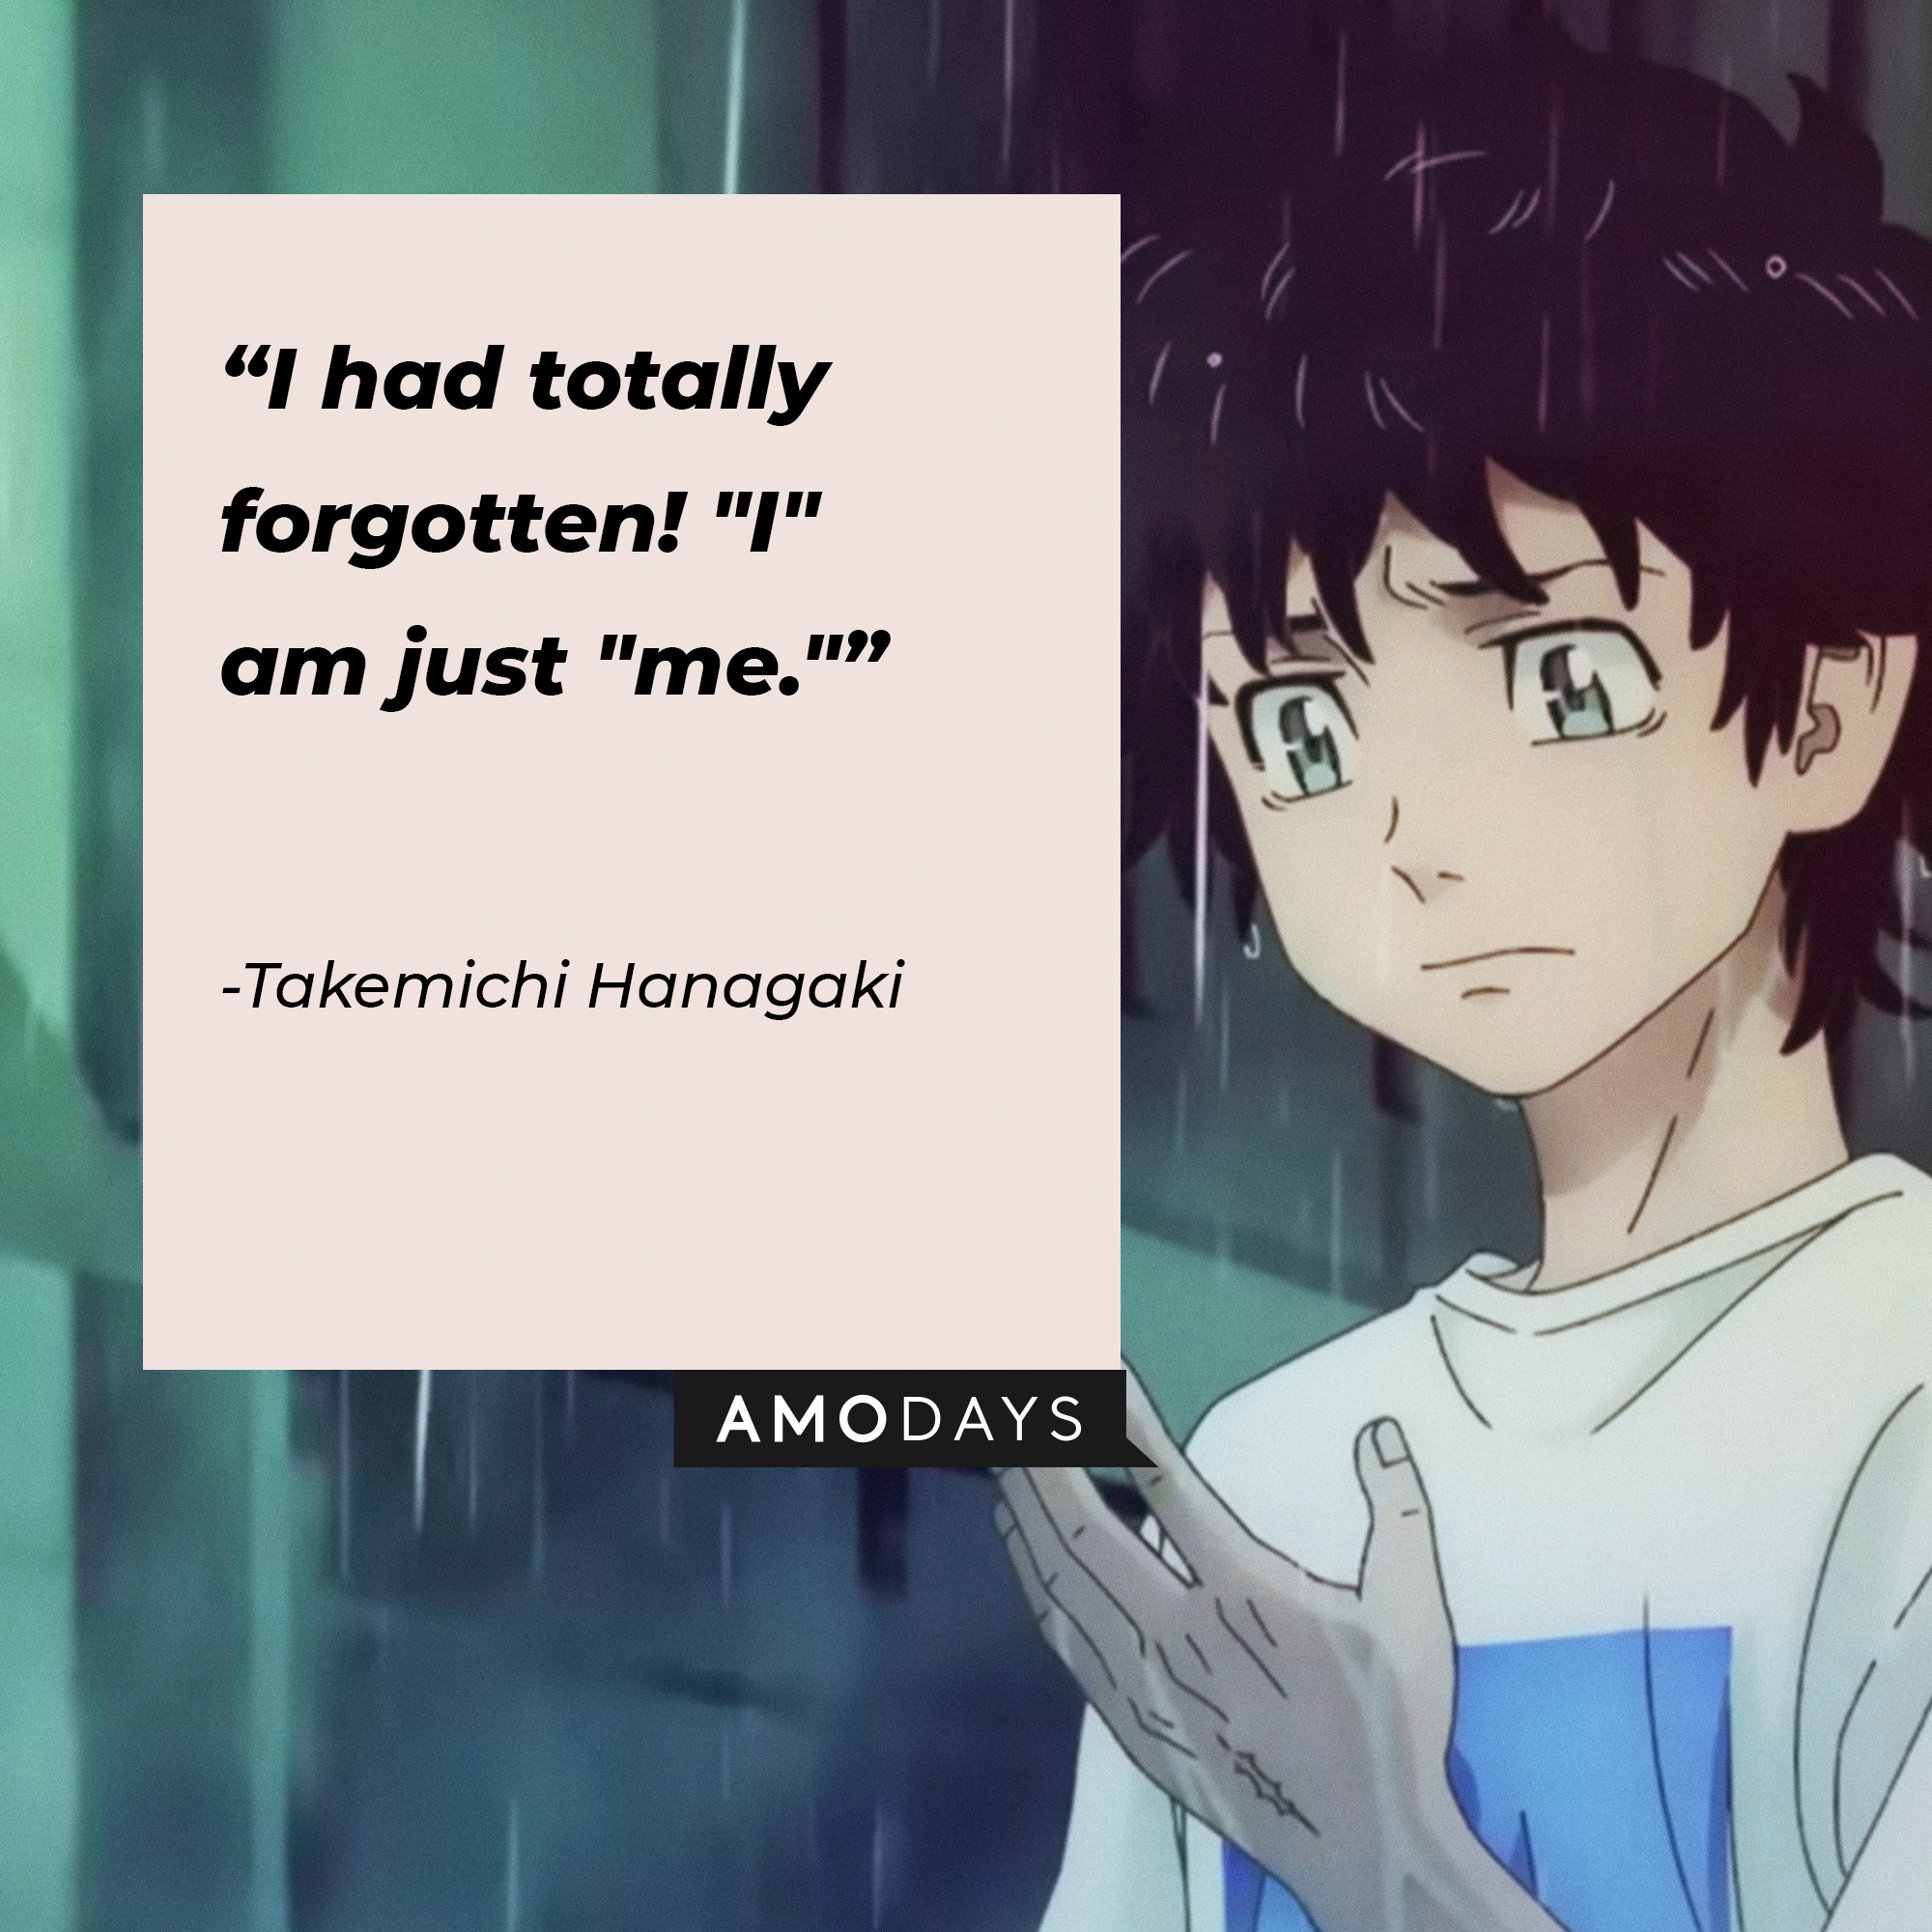 Takemichi Hanagaki's quote: "I had totally forgotten! "I" am just "me."" | Source: Youtube.com/Crunchyroll Collection